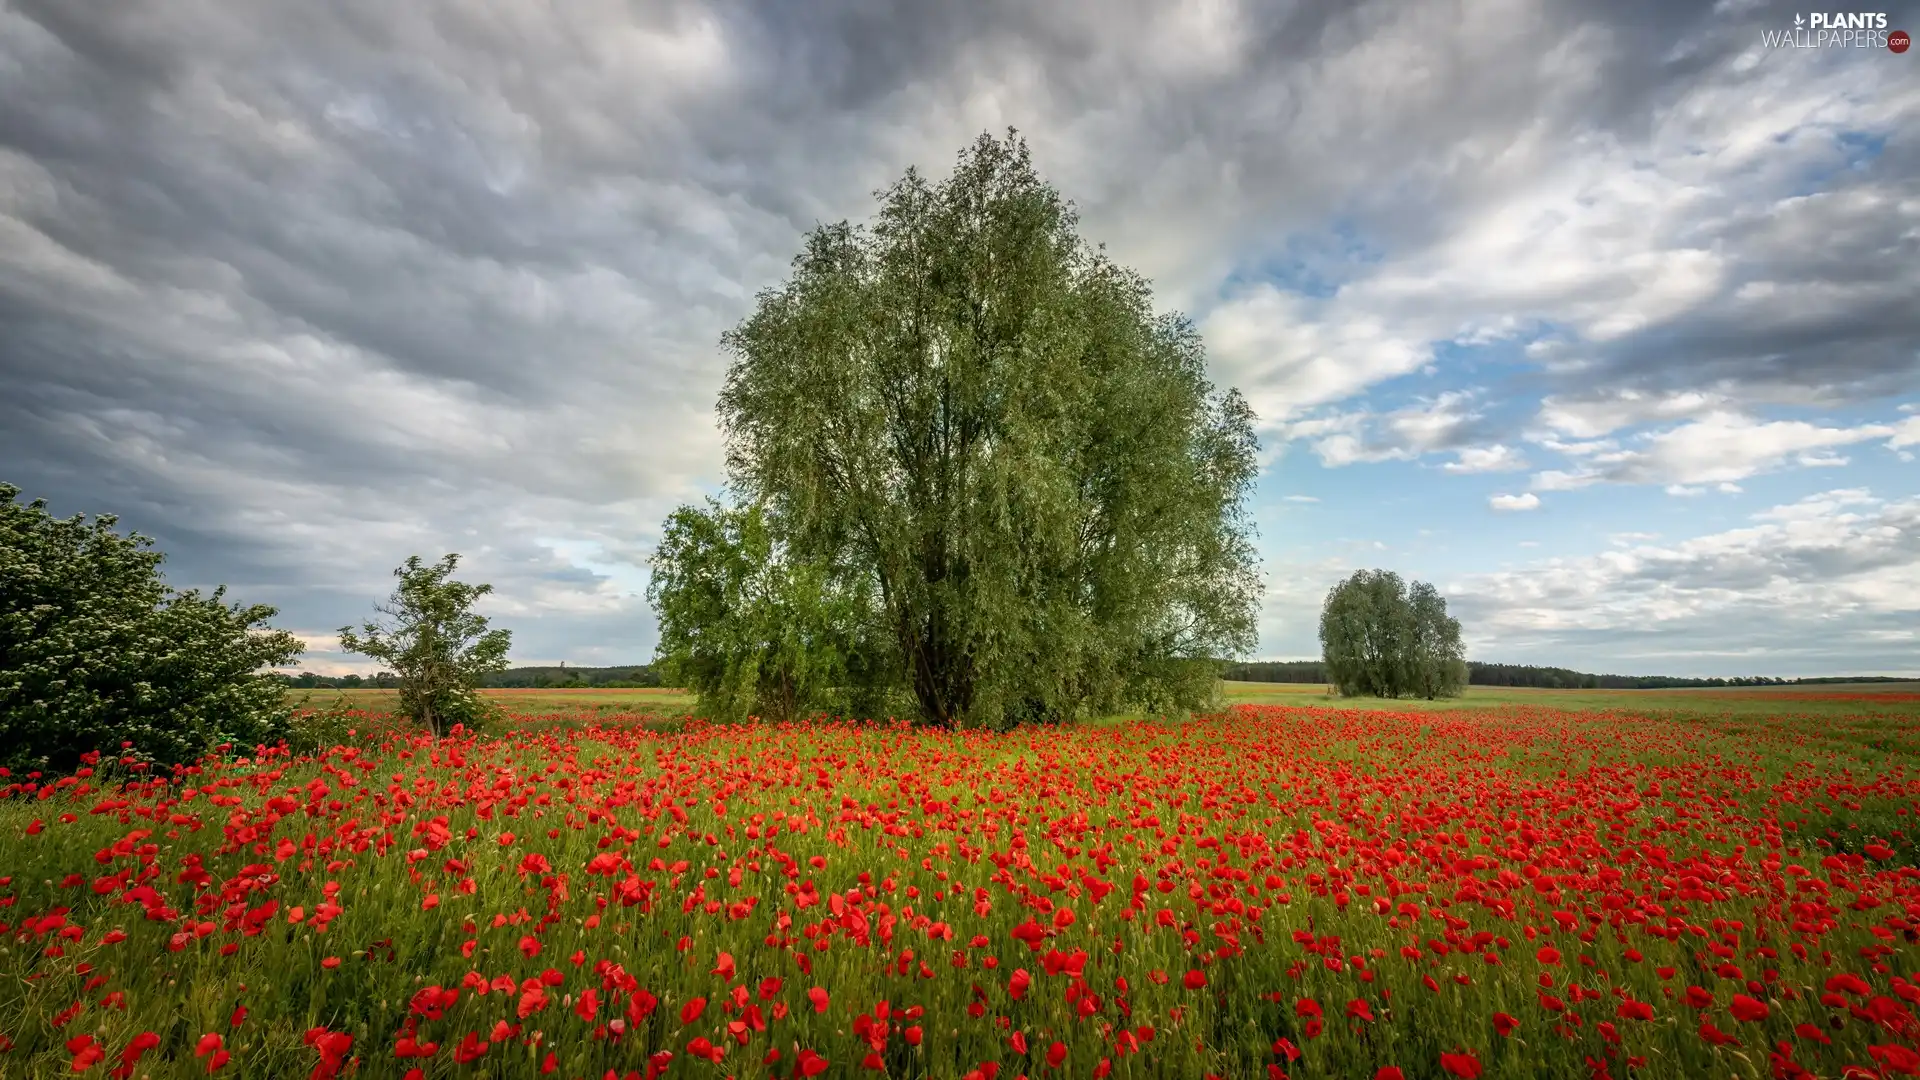 trees, Meadow, Bush, clouds, viewes, papavers